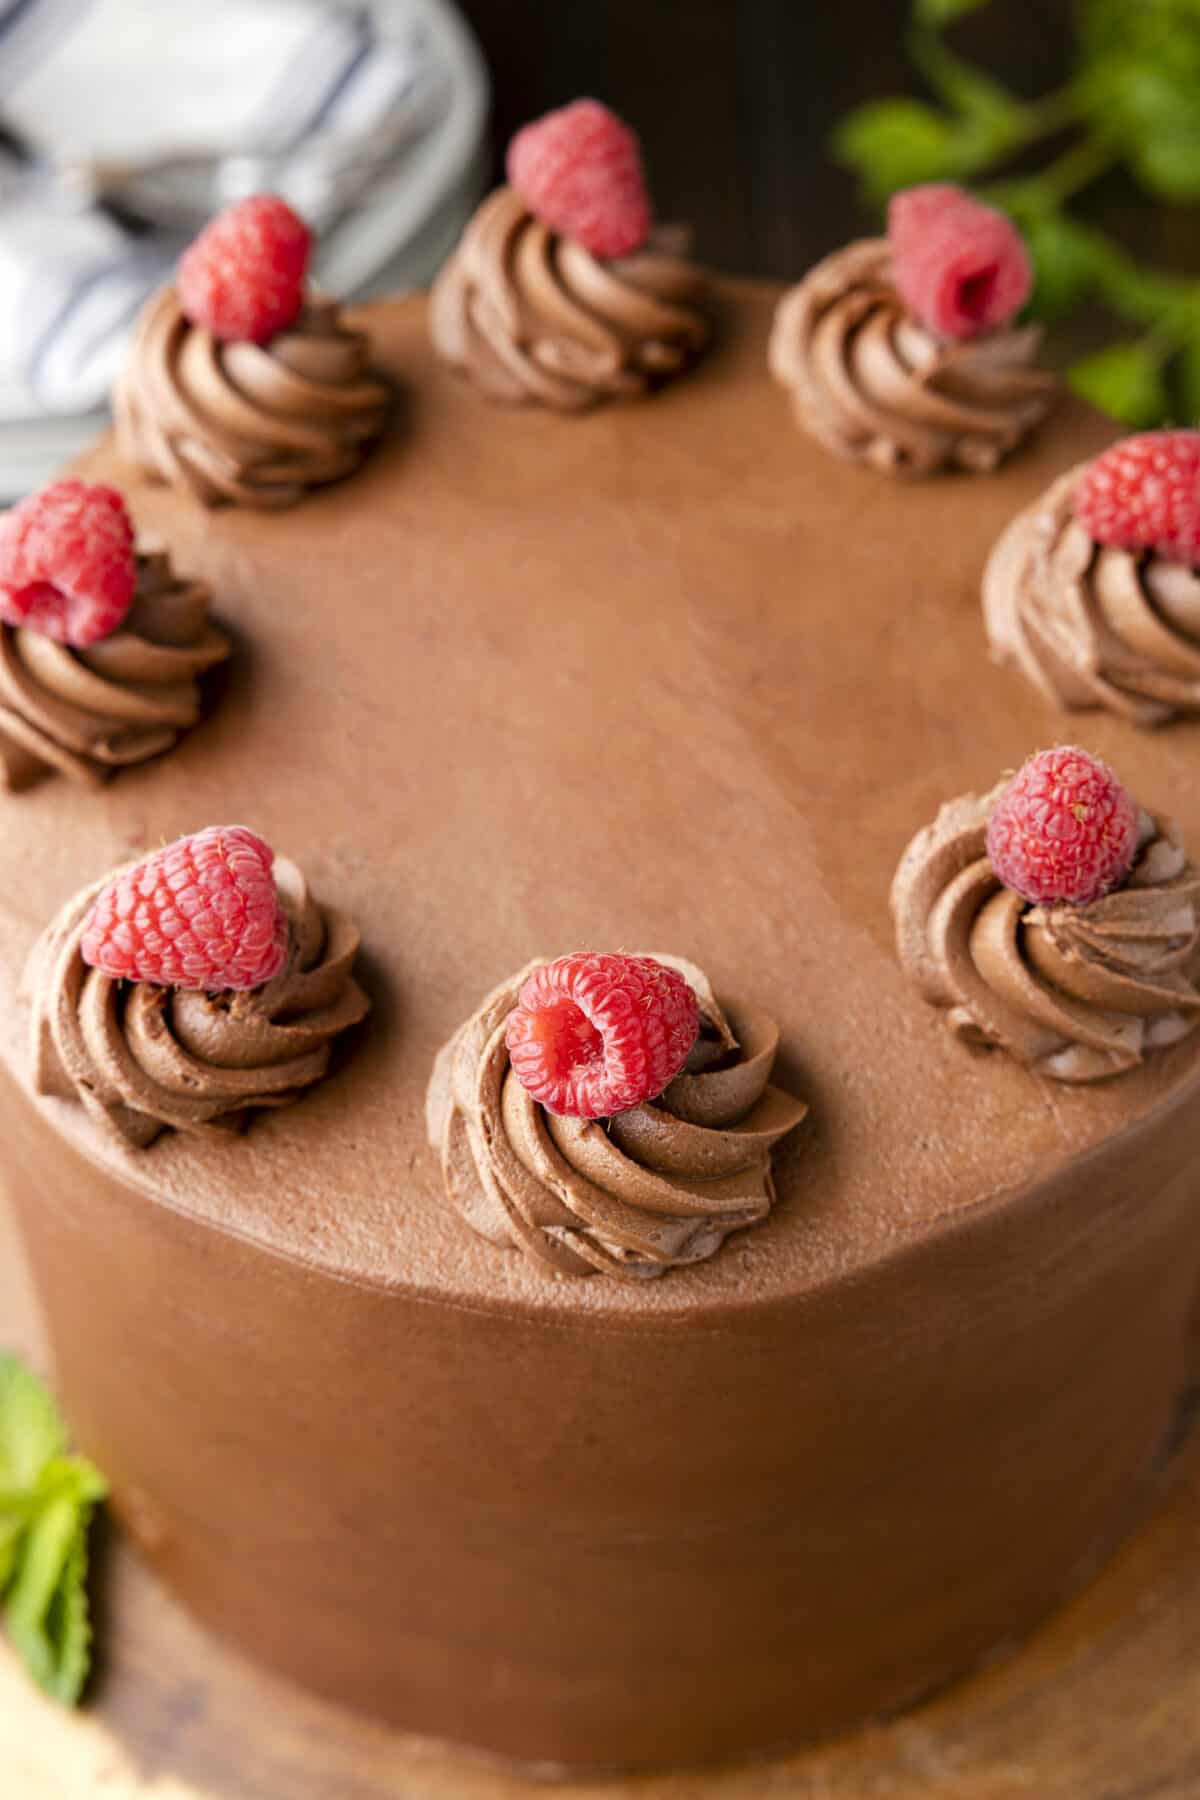 View of top of chocolate raspberry cake with buttercream swirls topped with raspberries